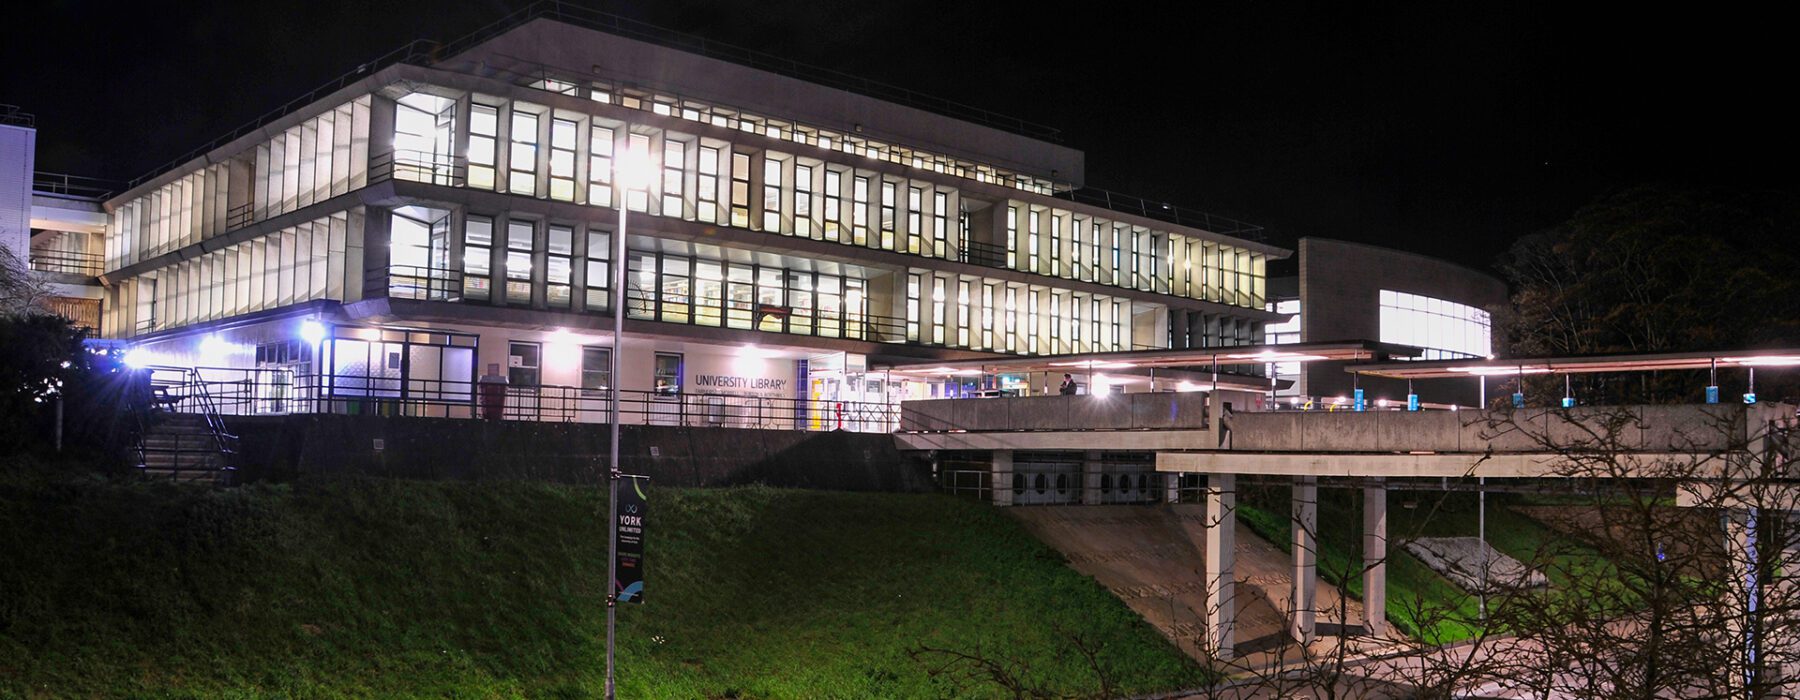 image of Library at night